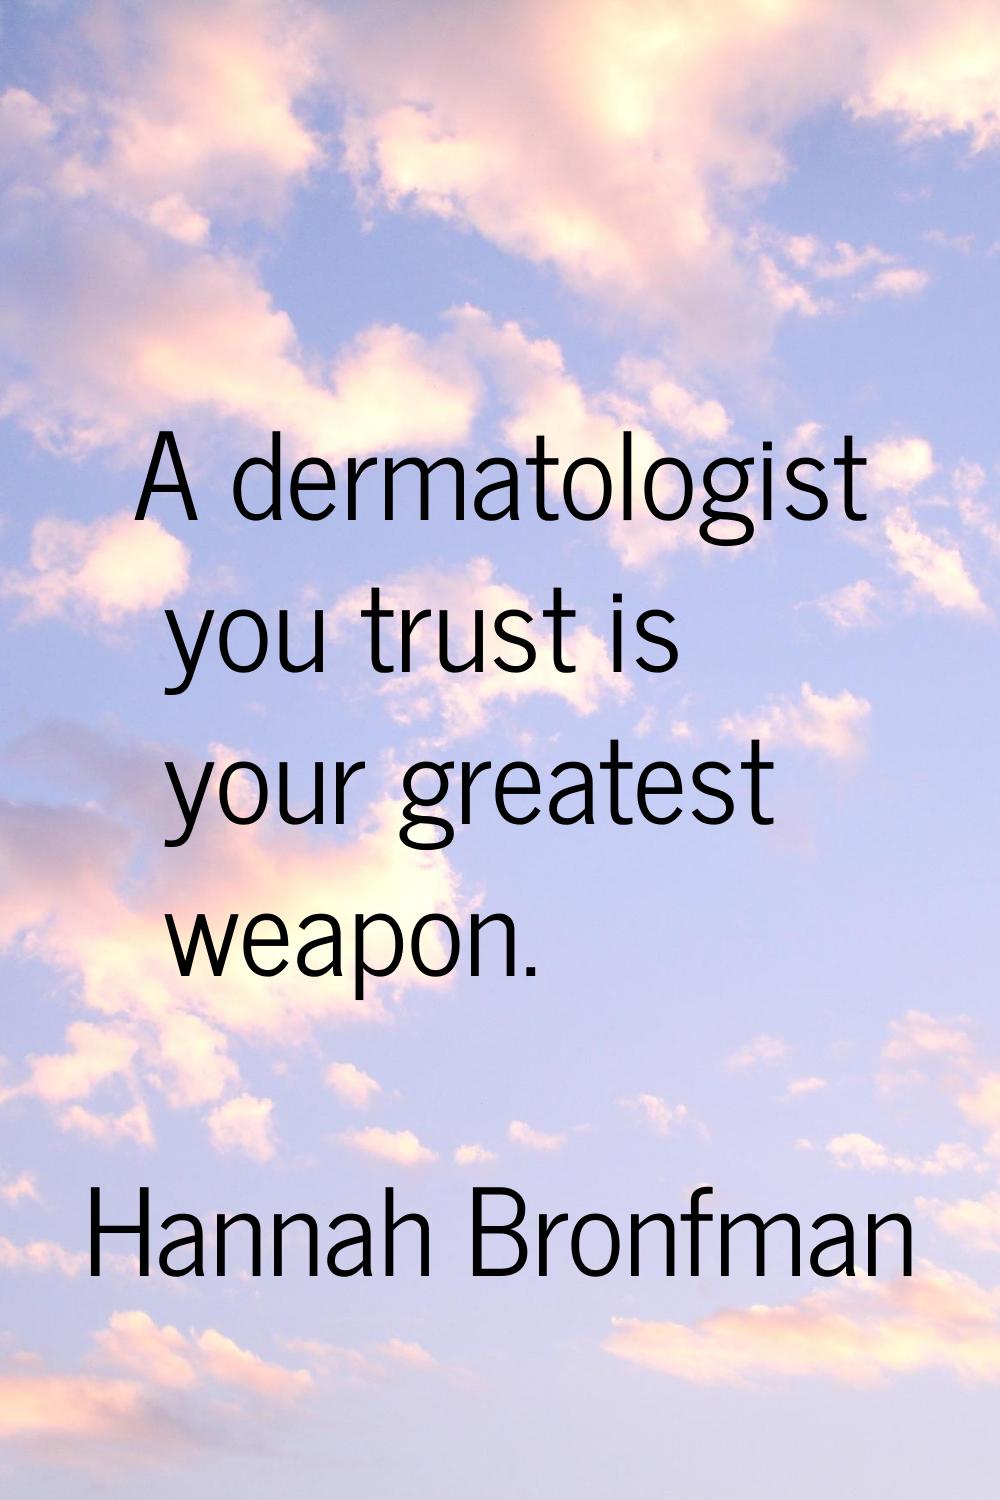 A dermatologist you trust is your greatest weapon.